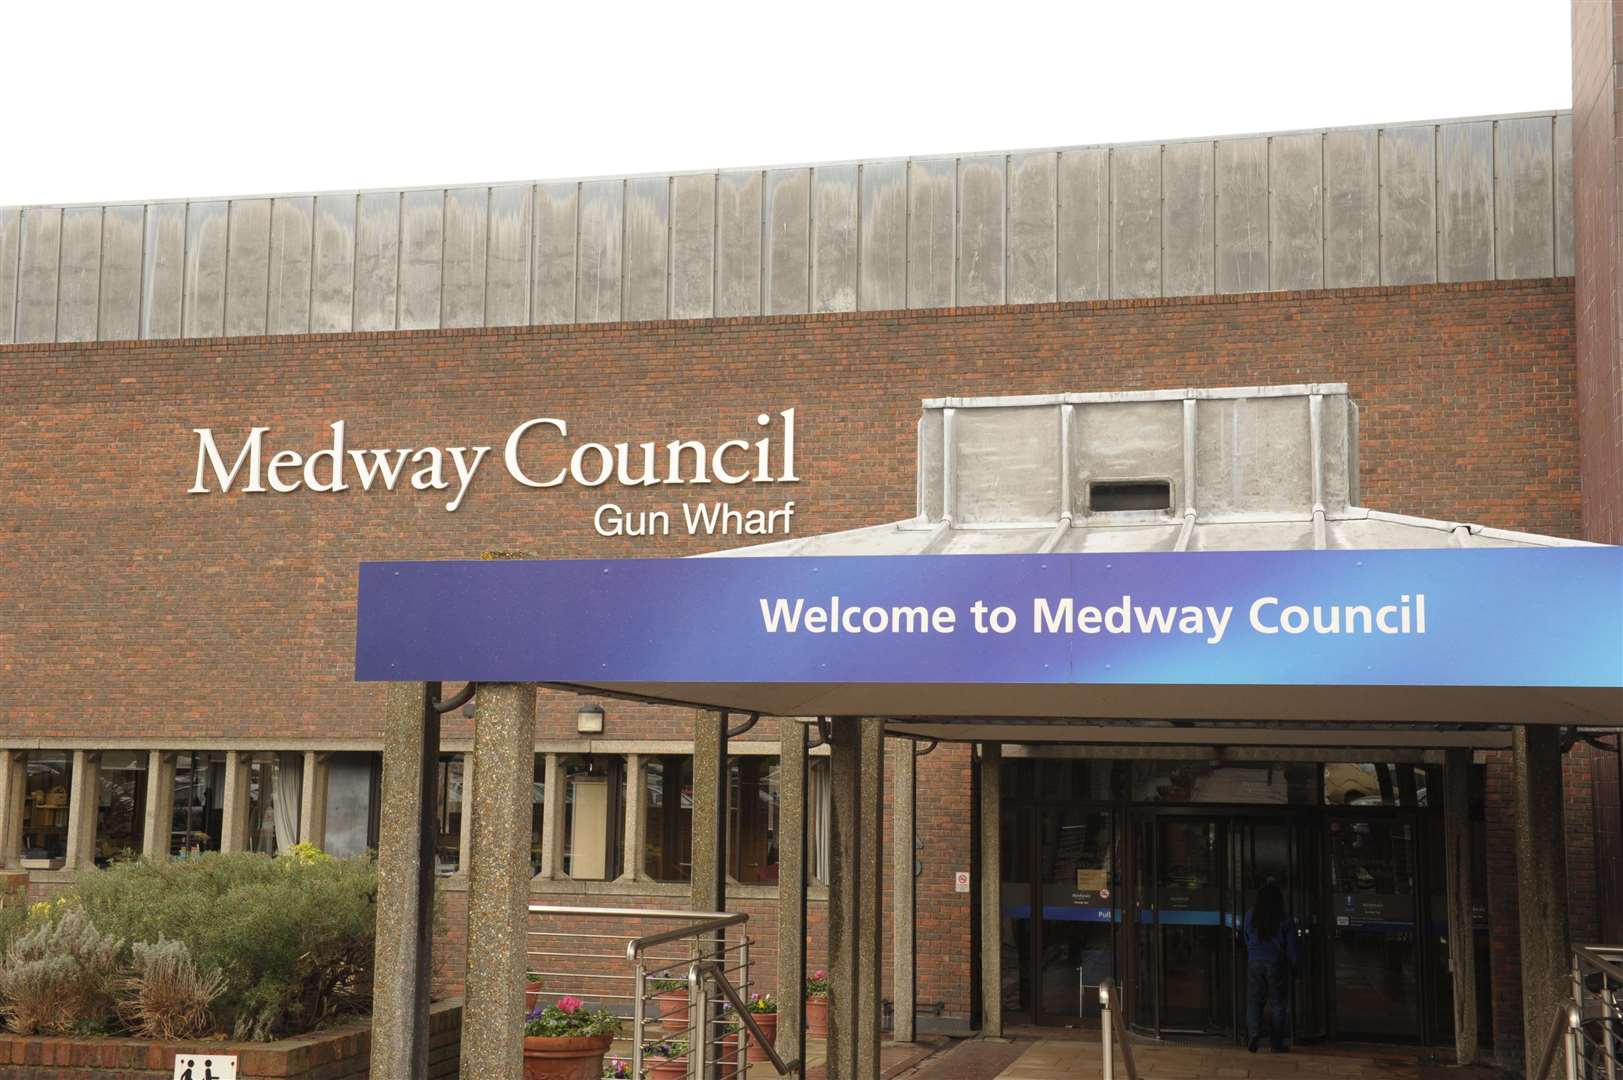 Medway Council is based in Gun Wharf, Dock Road, Chatham. Picture: Steve Crispe